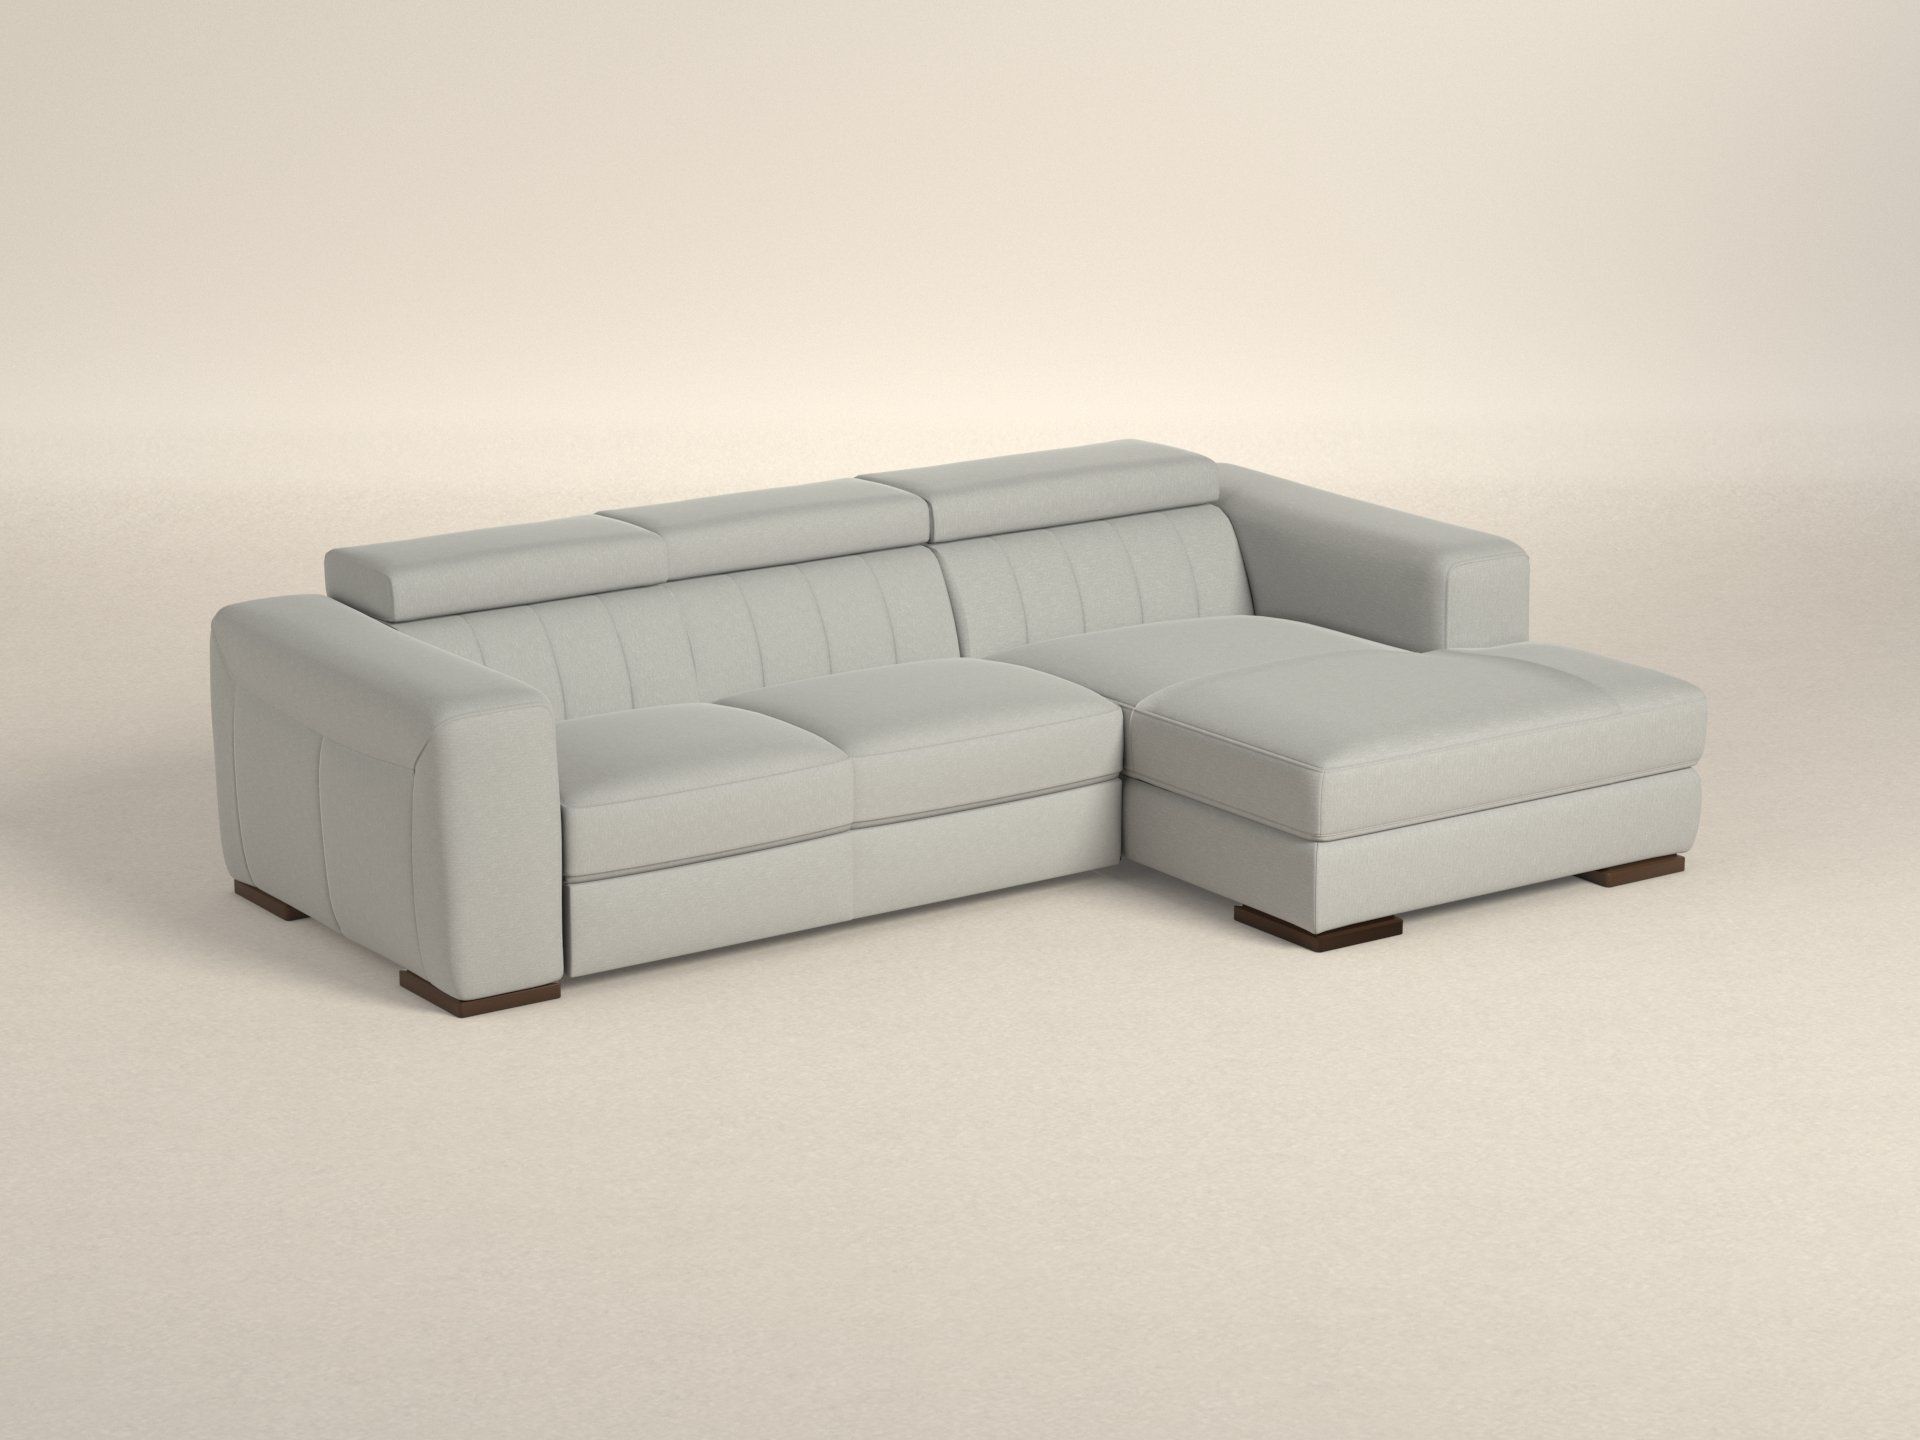 Preset default image - Forza Sofa with Chaise on right side - Fabric